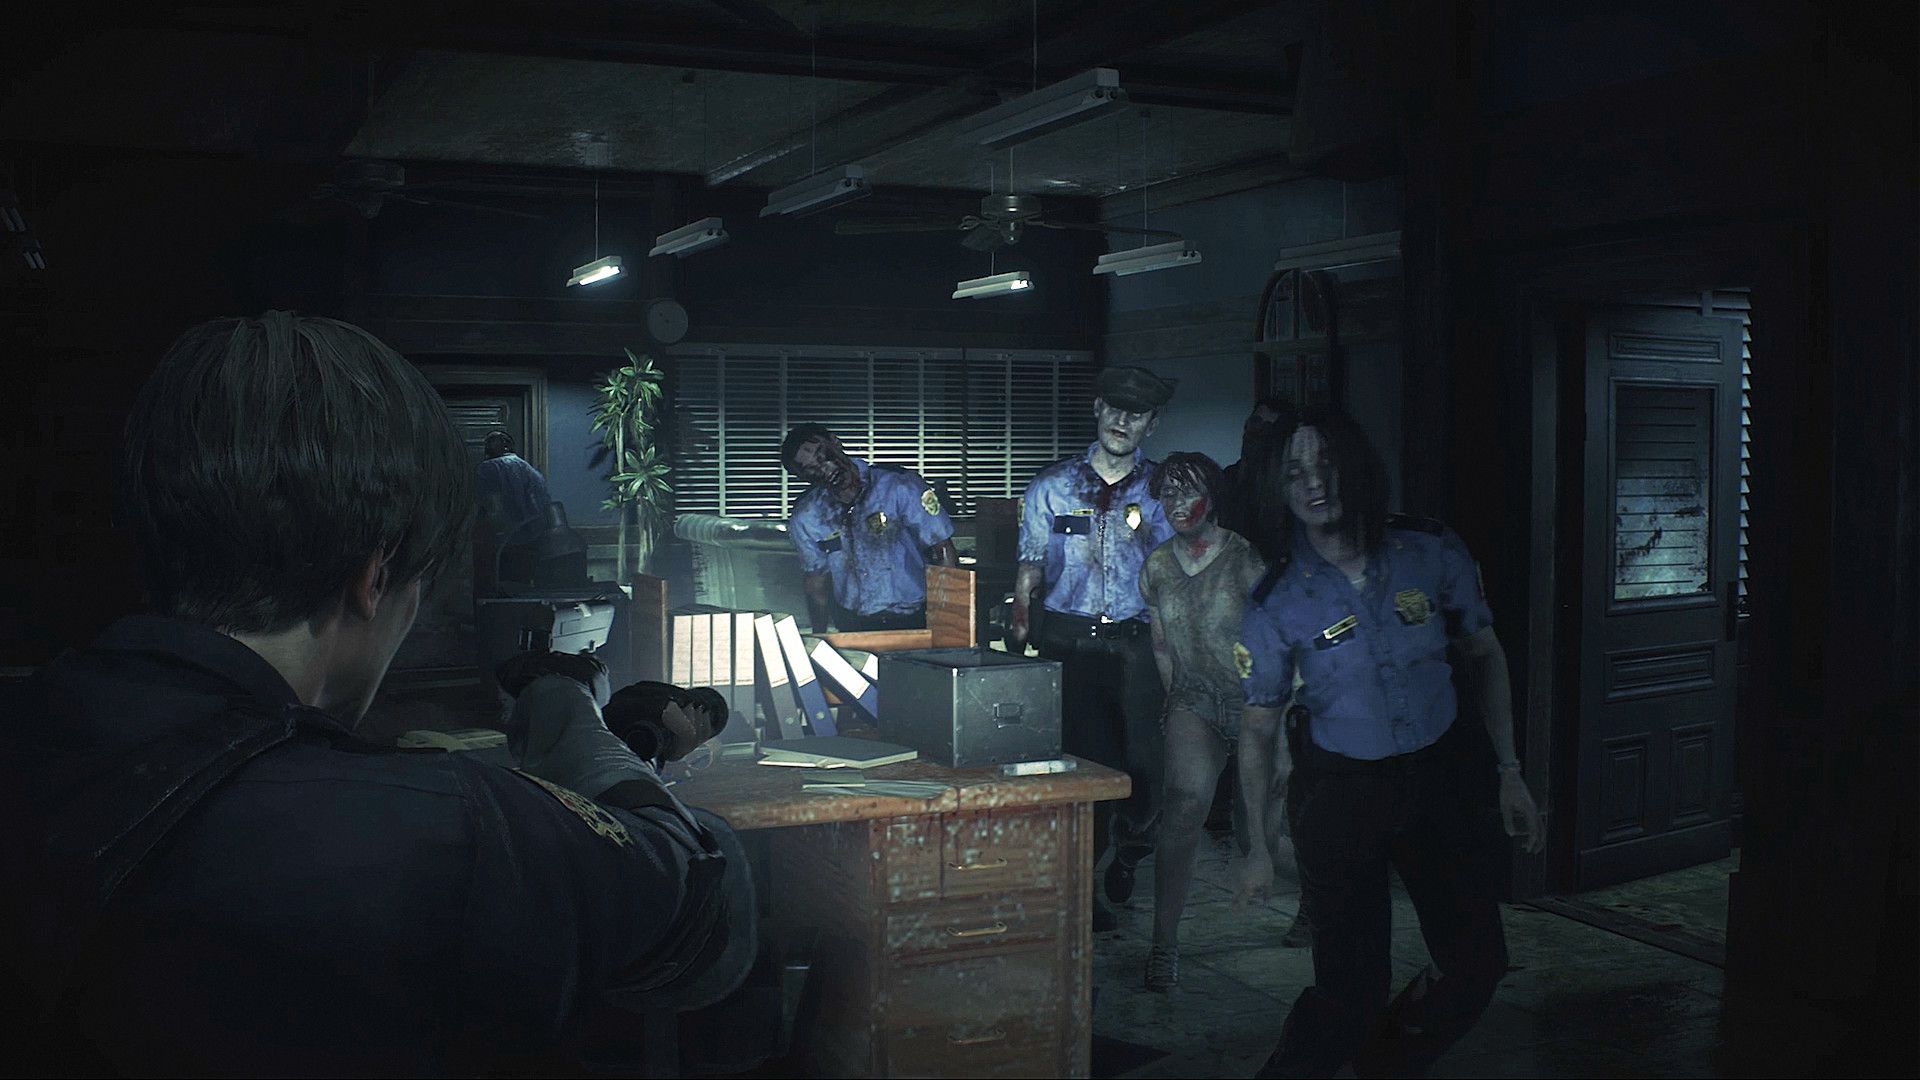 How to change original soundtrack and sound effects in Resident Evil 2